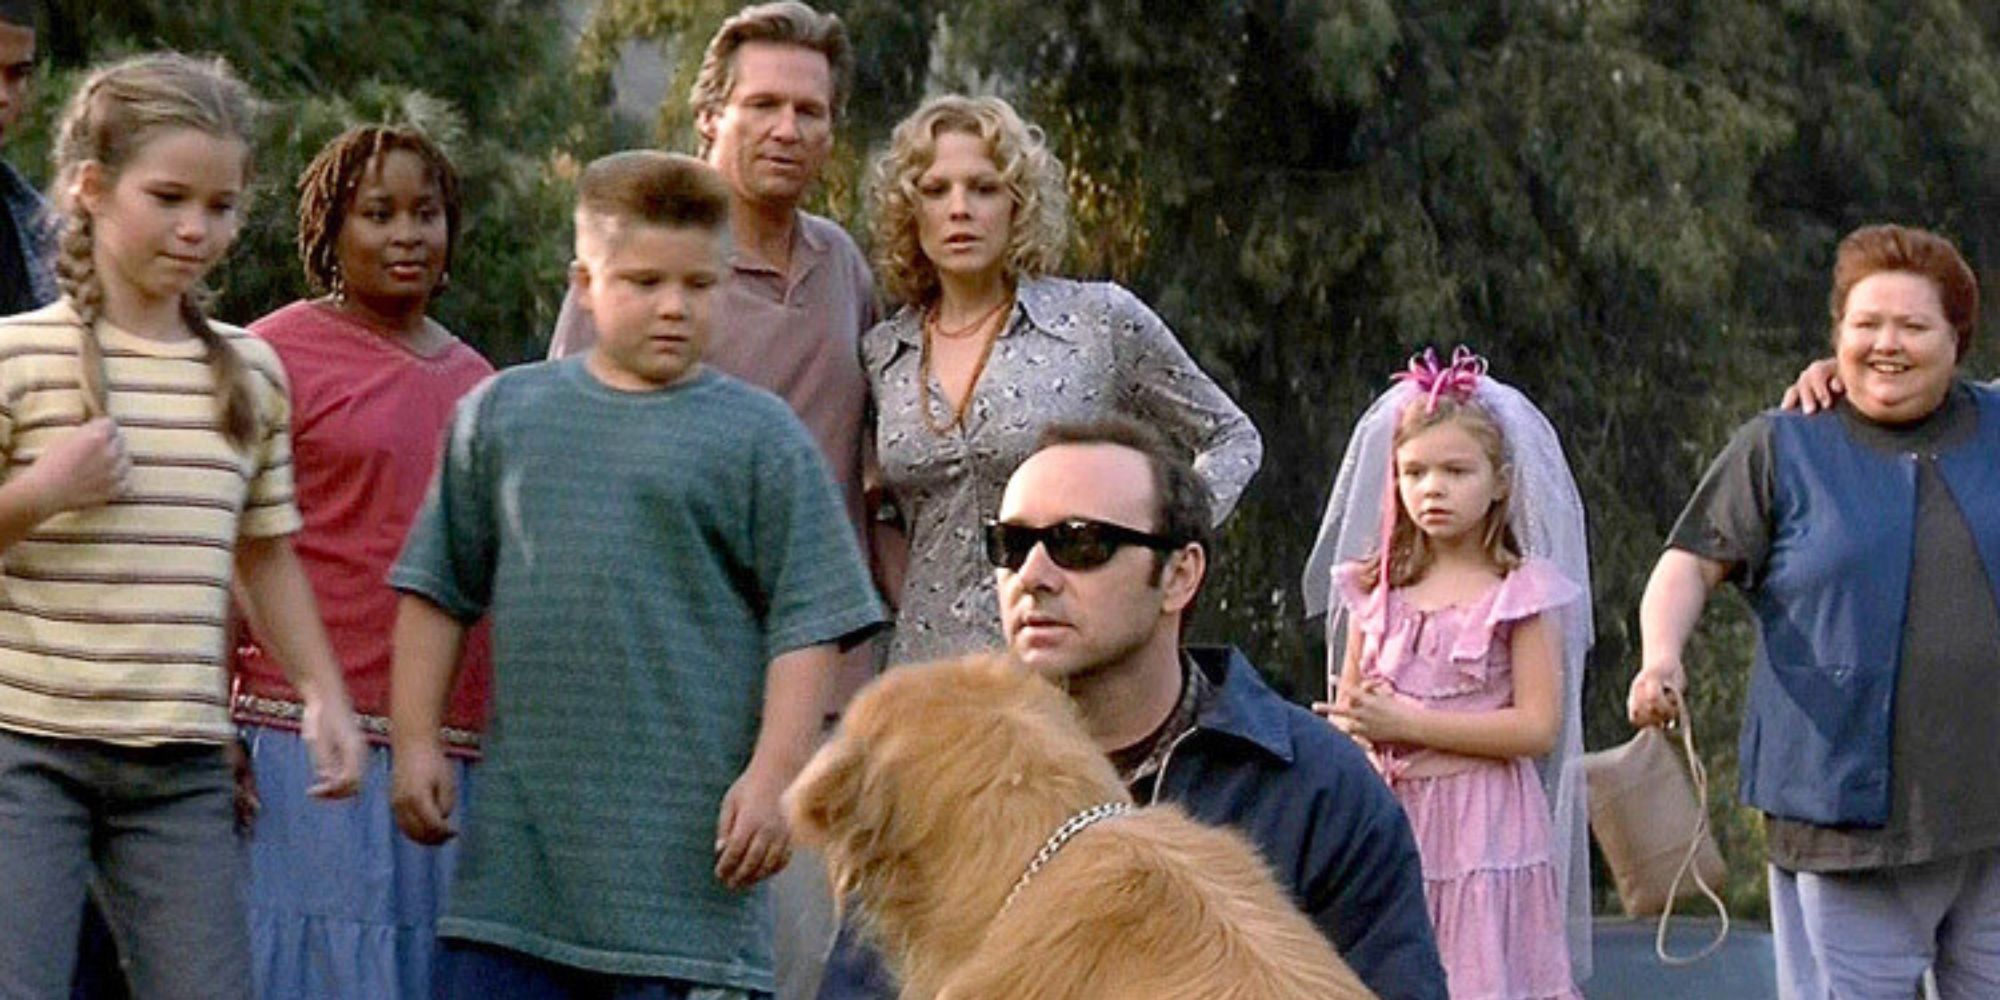 Kevin Spacey sitting in front of a dog on the ground surrounded by Jeff Bridges and others in K-Pax (2001)